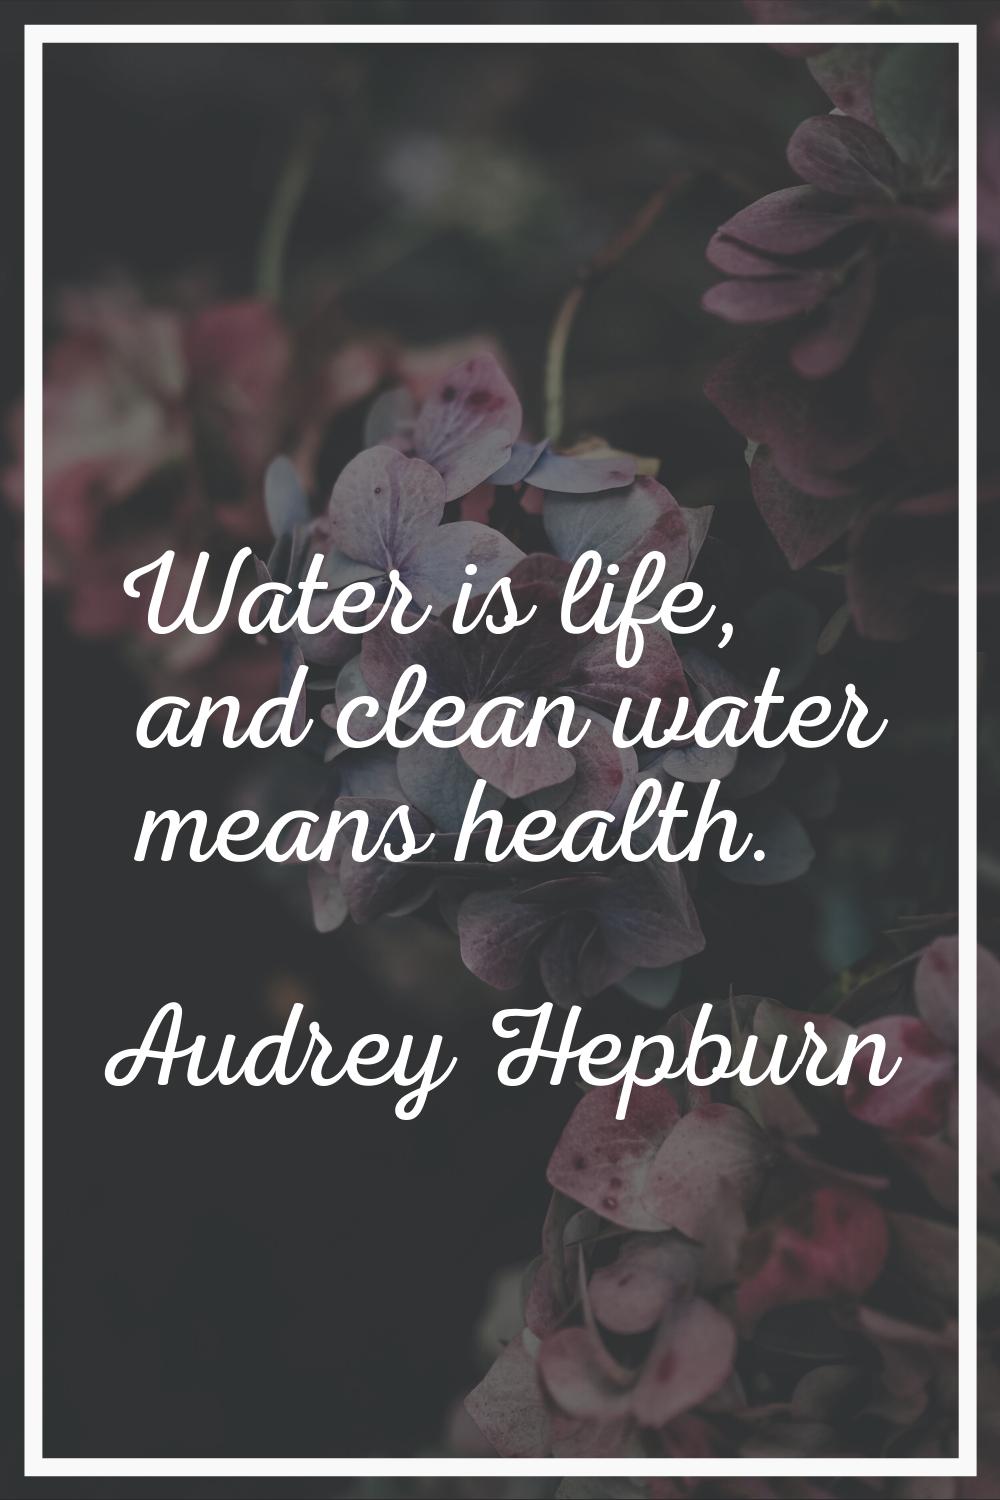 Water is life, and clean water means health.